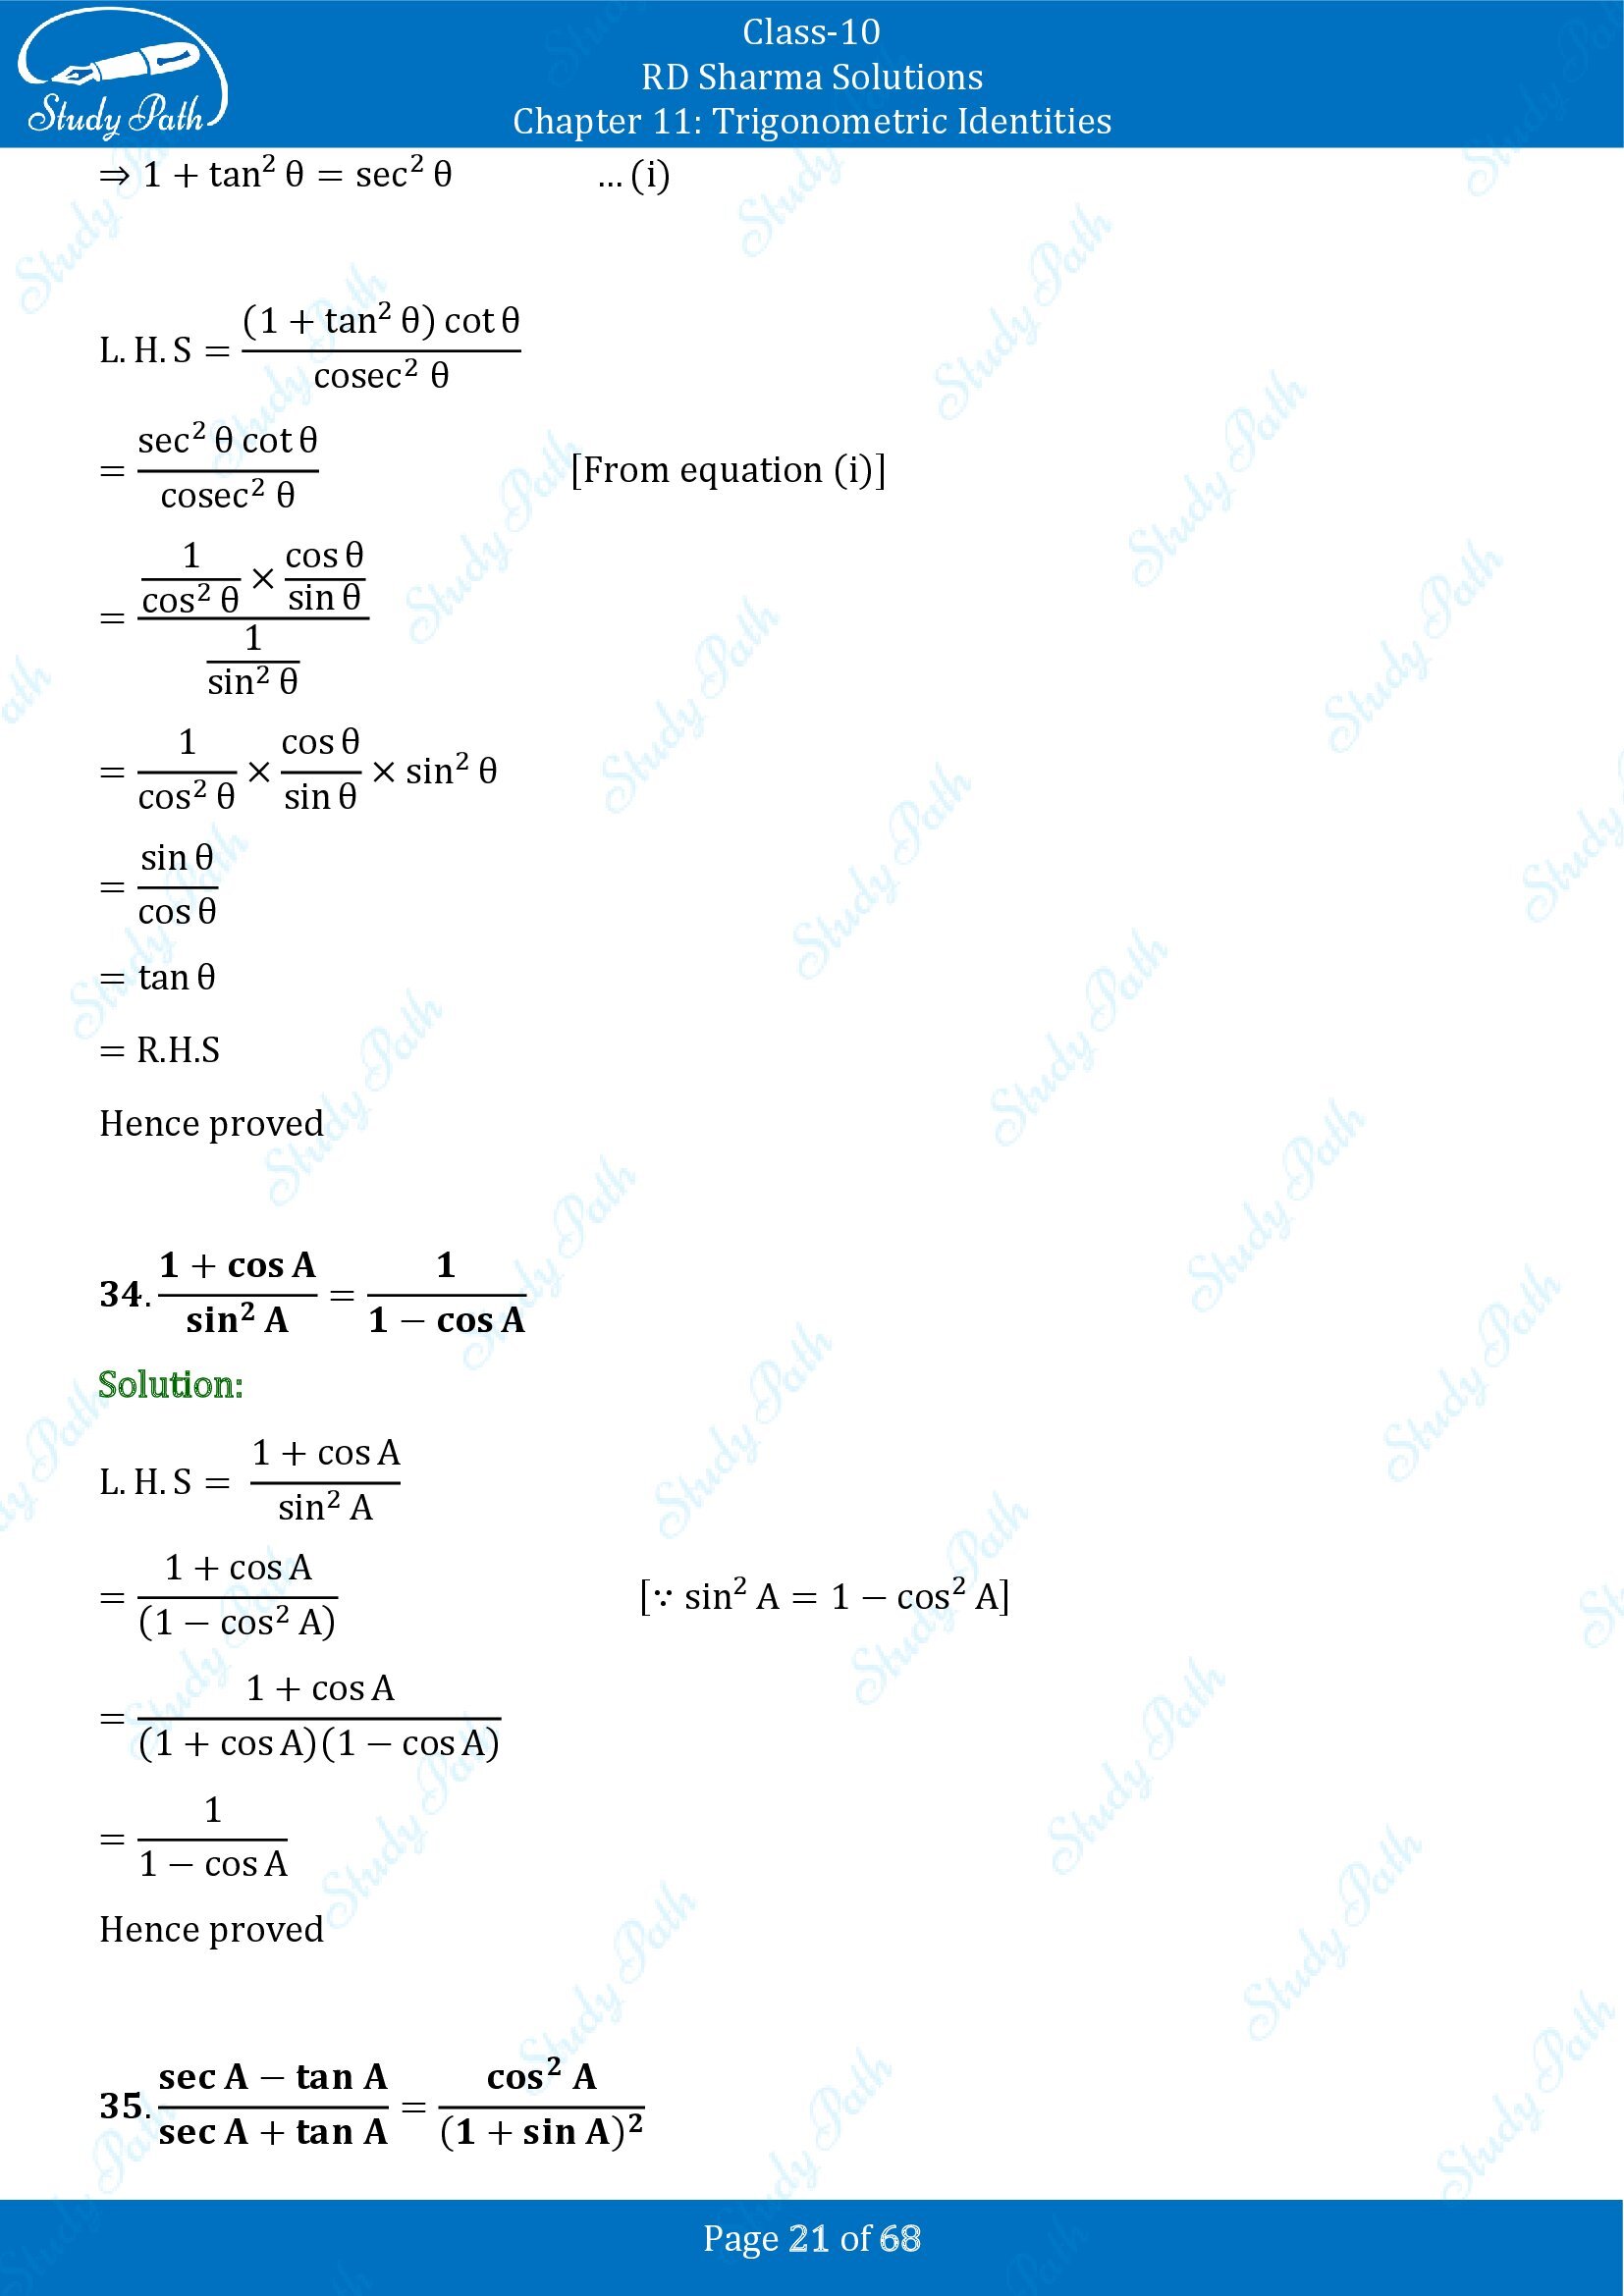 RD Sharma Solutions Class 10 Chapter 11 Trigonometric Identities Exercise 11.1 00021